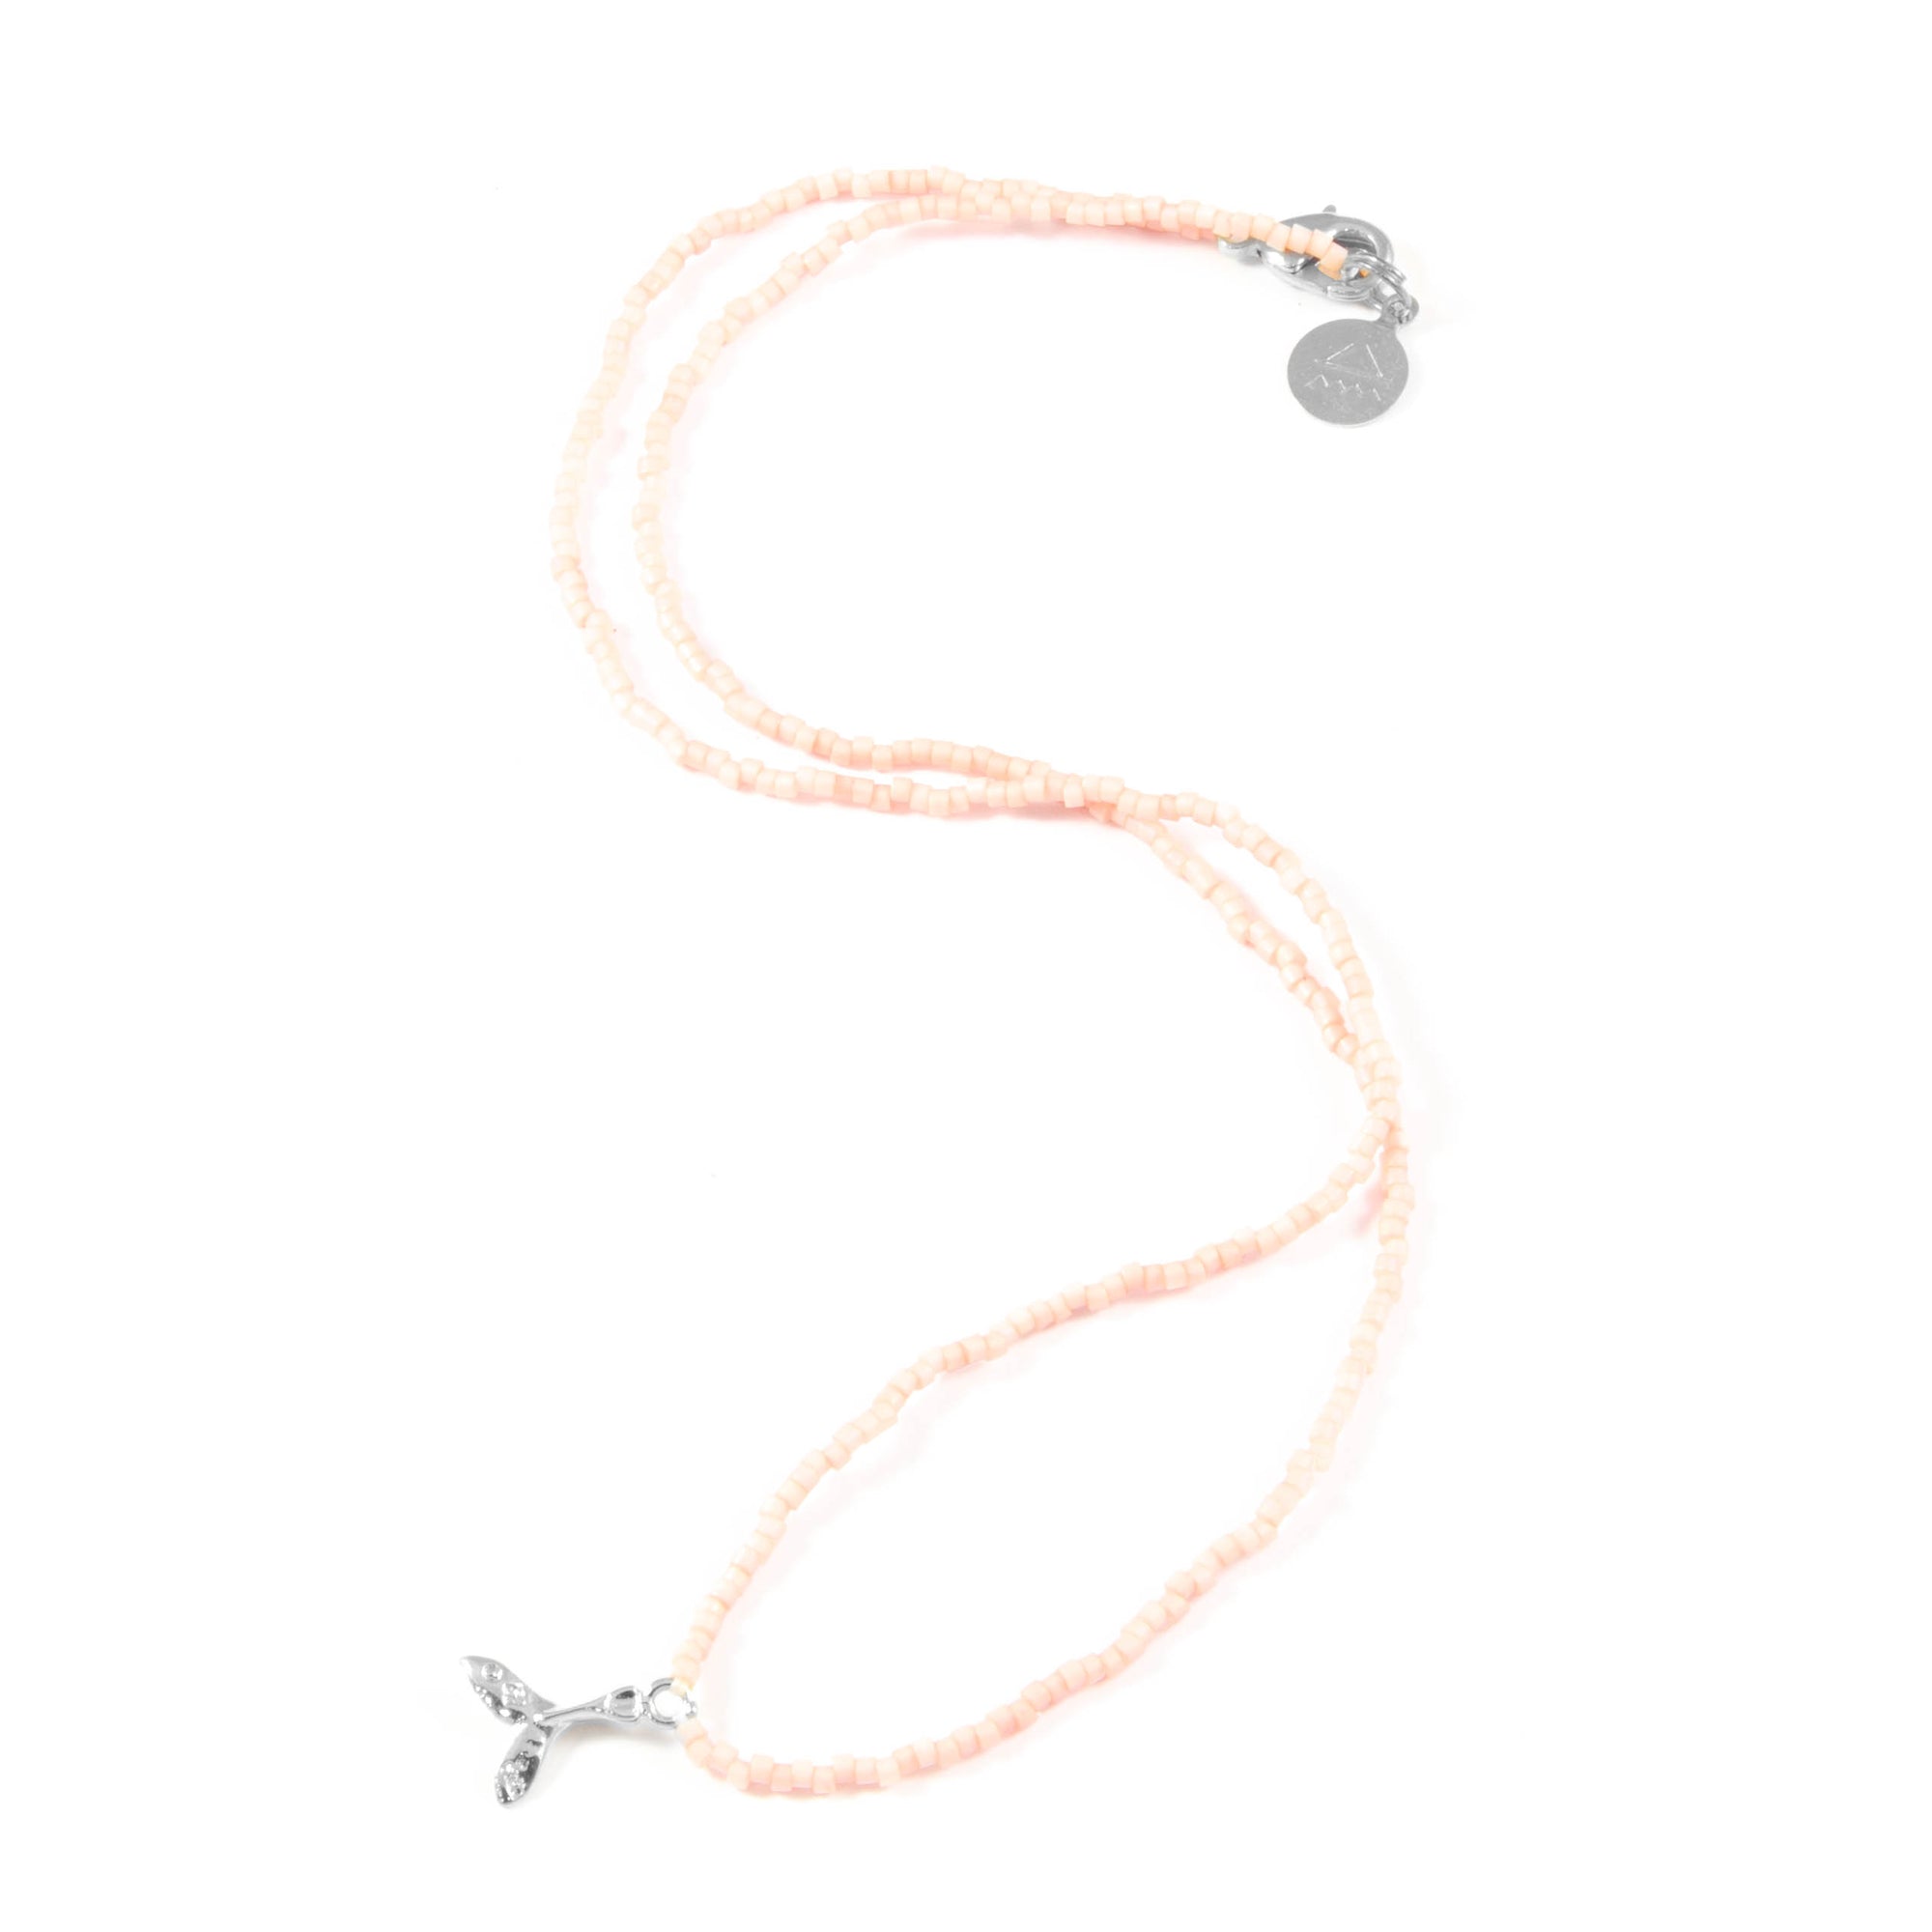 Coral Mermaid Tail Tiny Charm Necklace in Silver